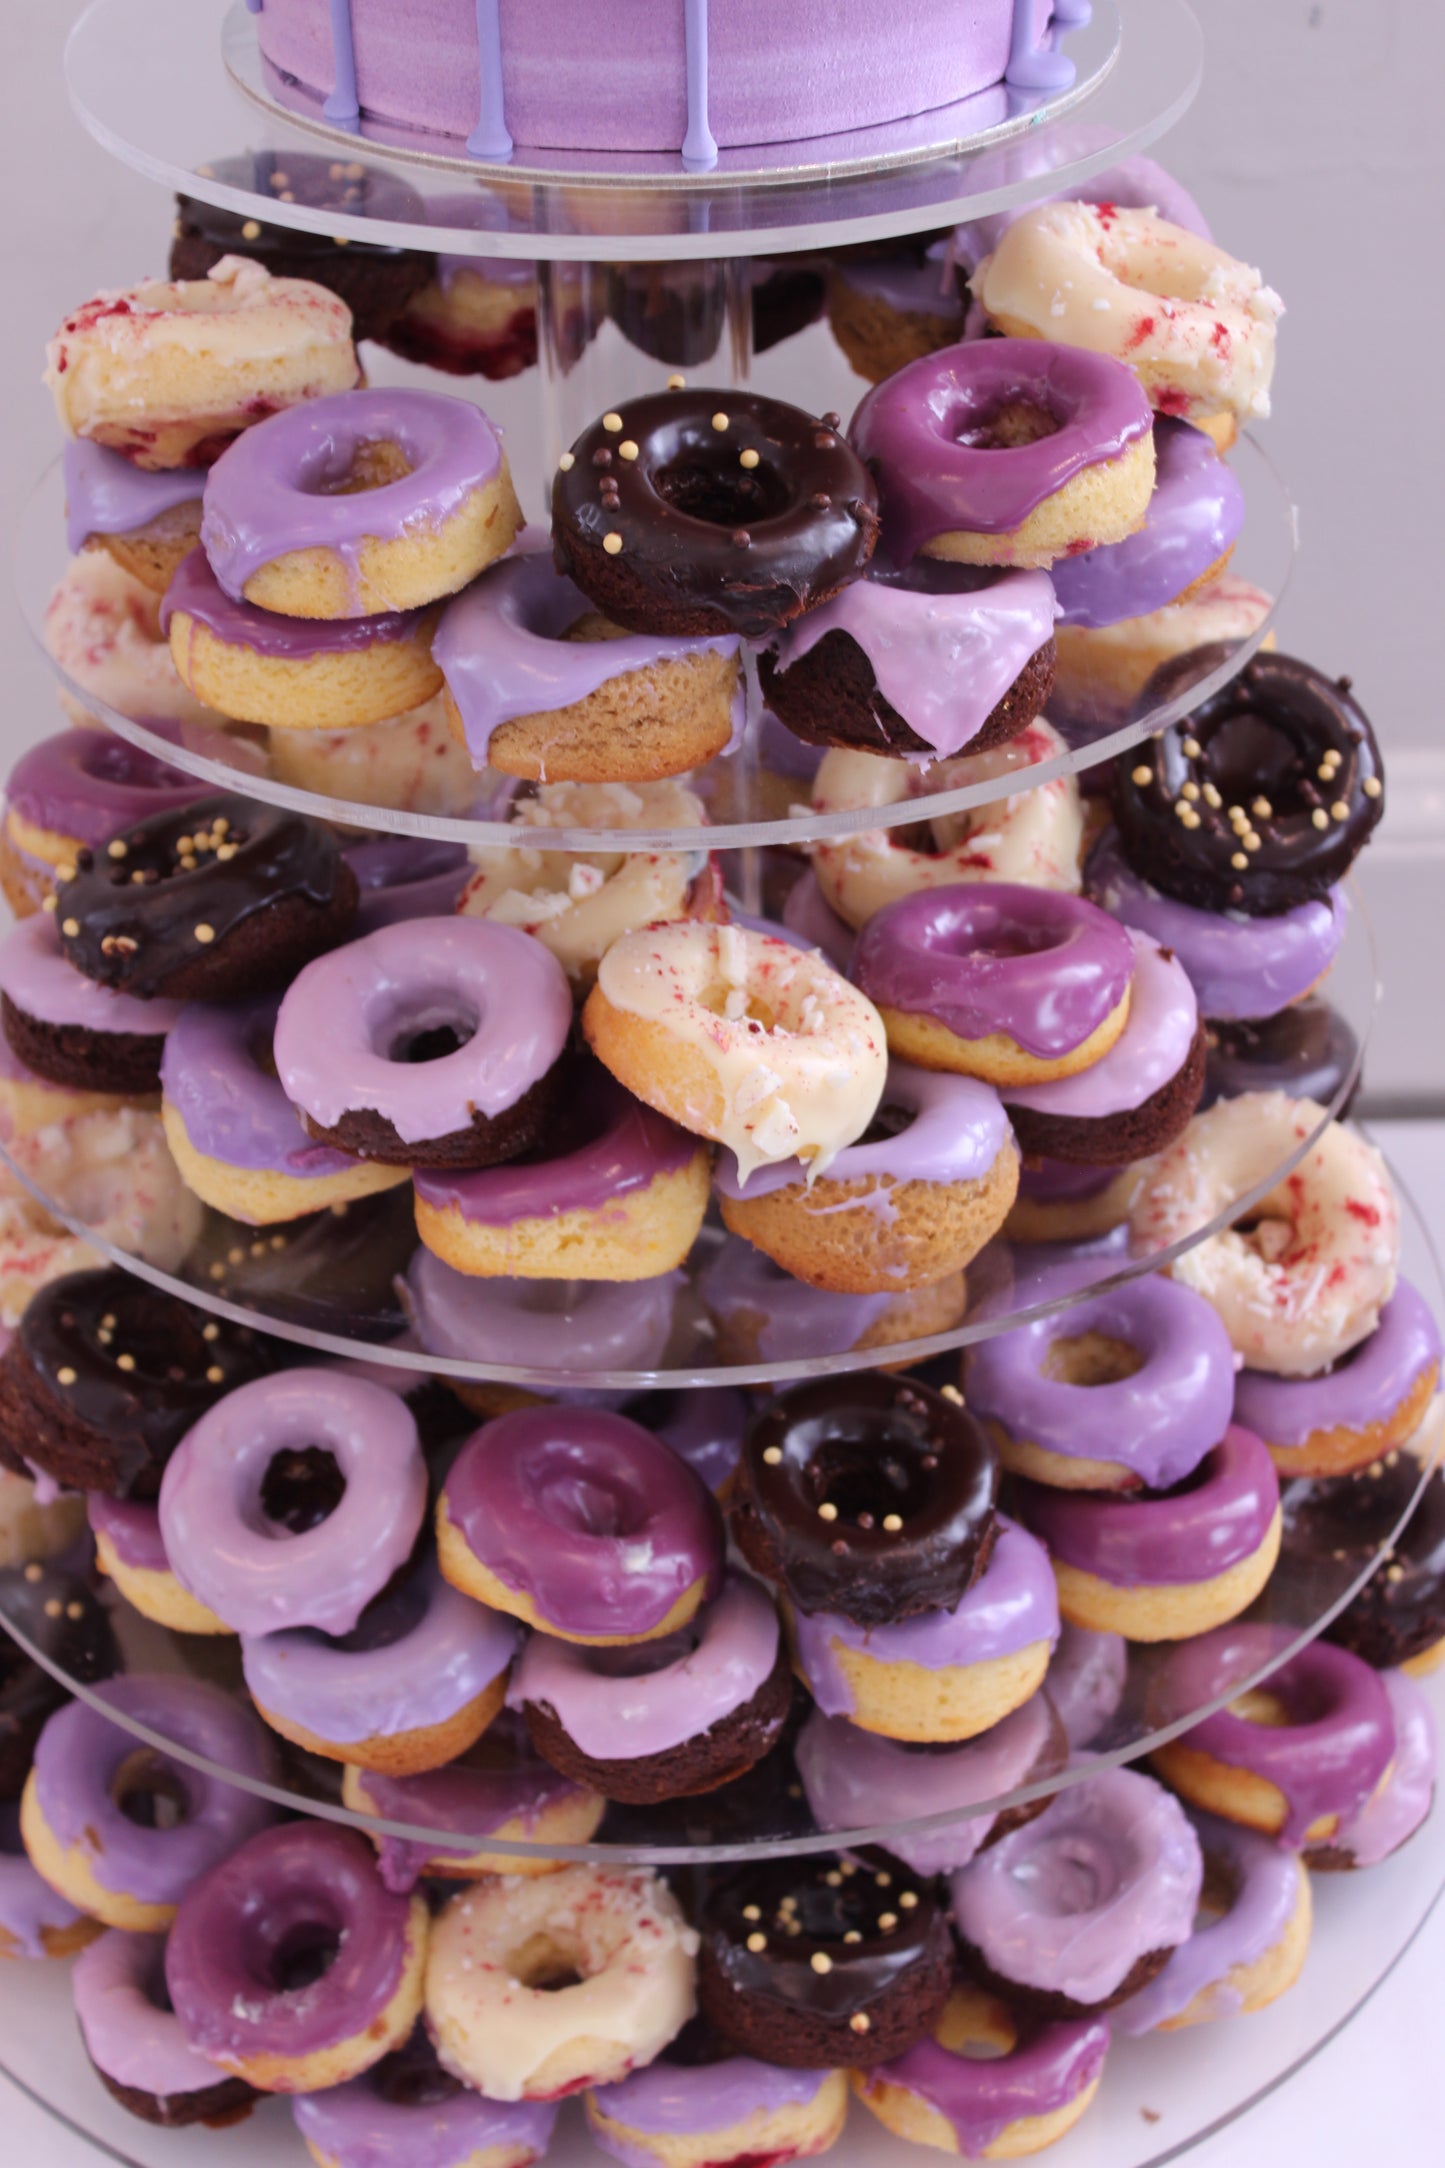 Donut Tower with Cutting Cake, Purple & Chocolate